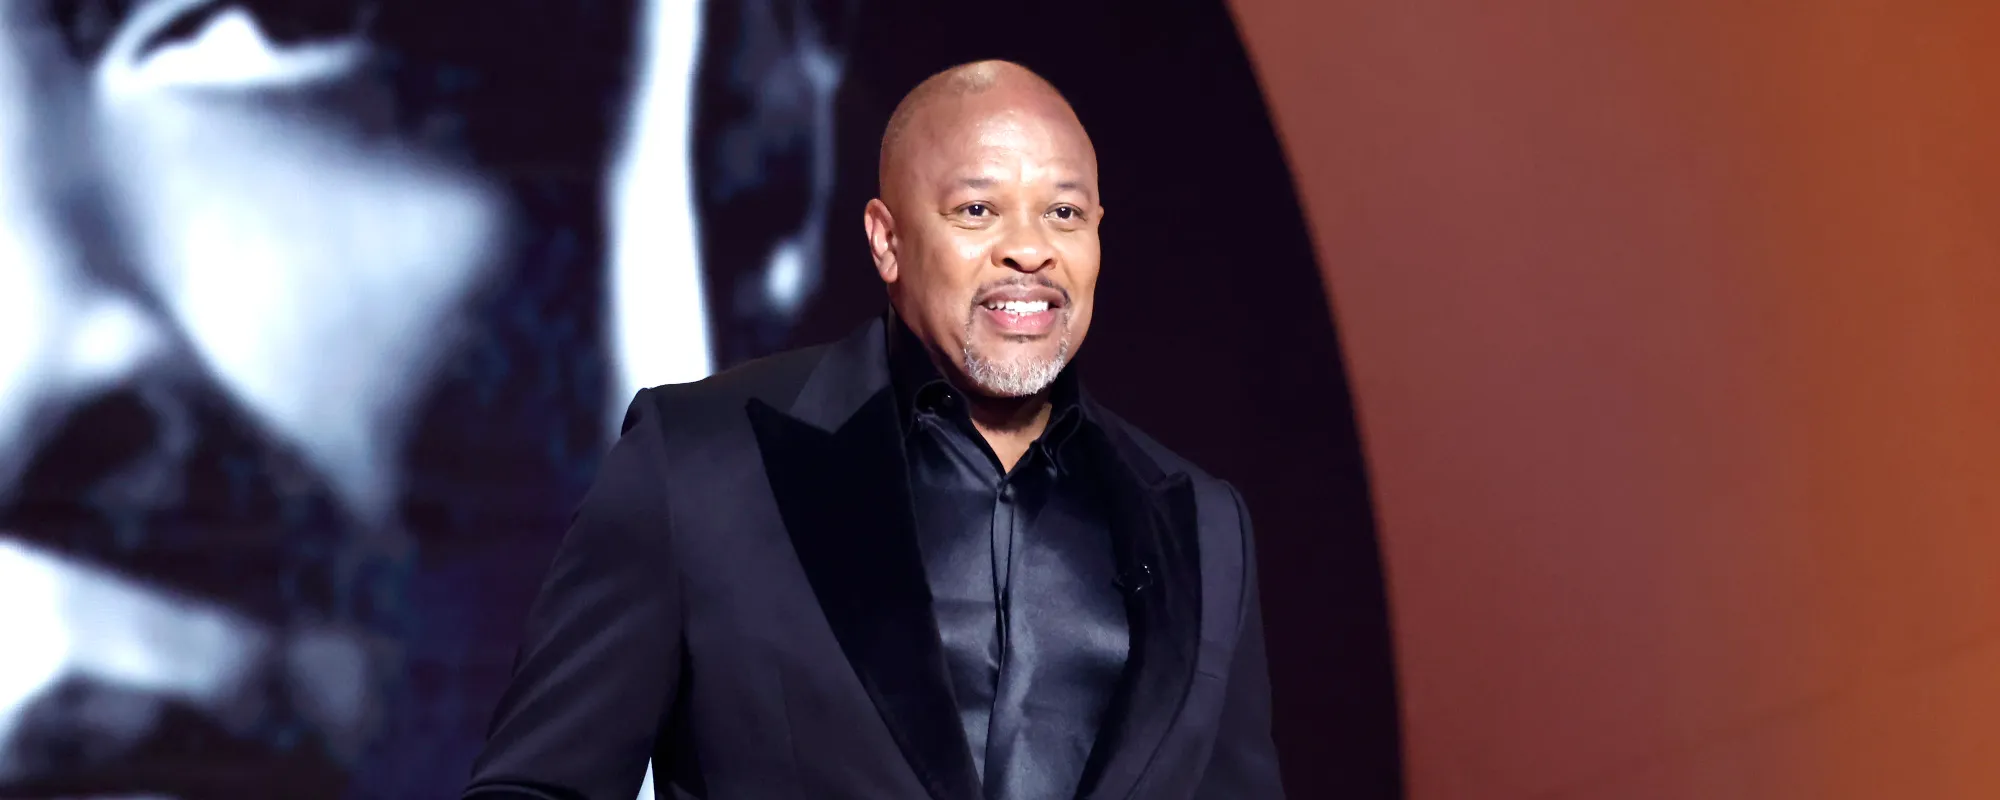 5 Artists Who Benefited from Working with Dr. Dre